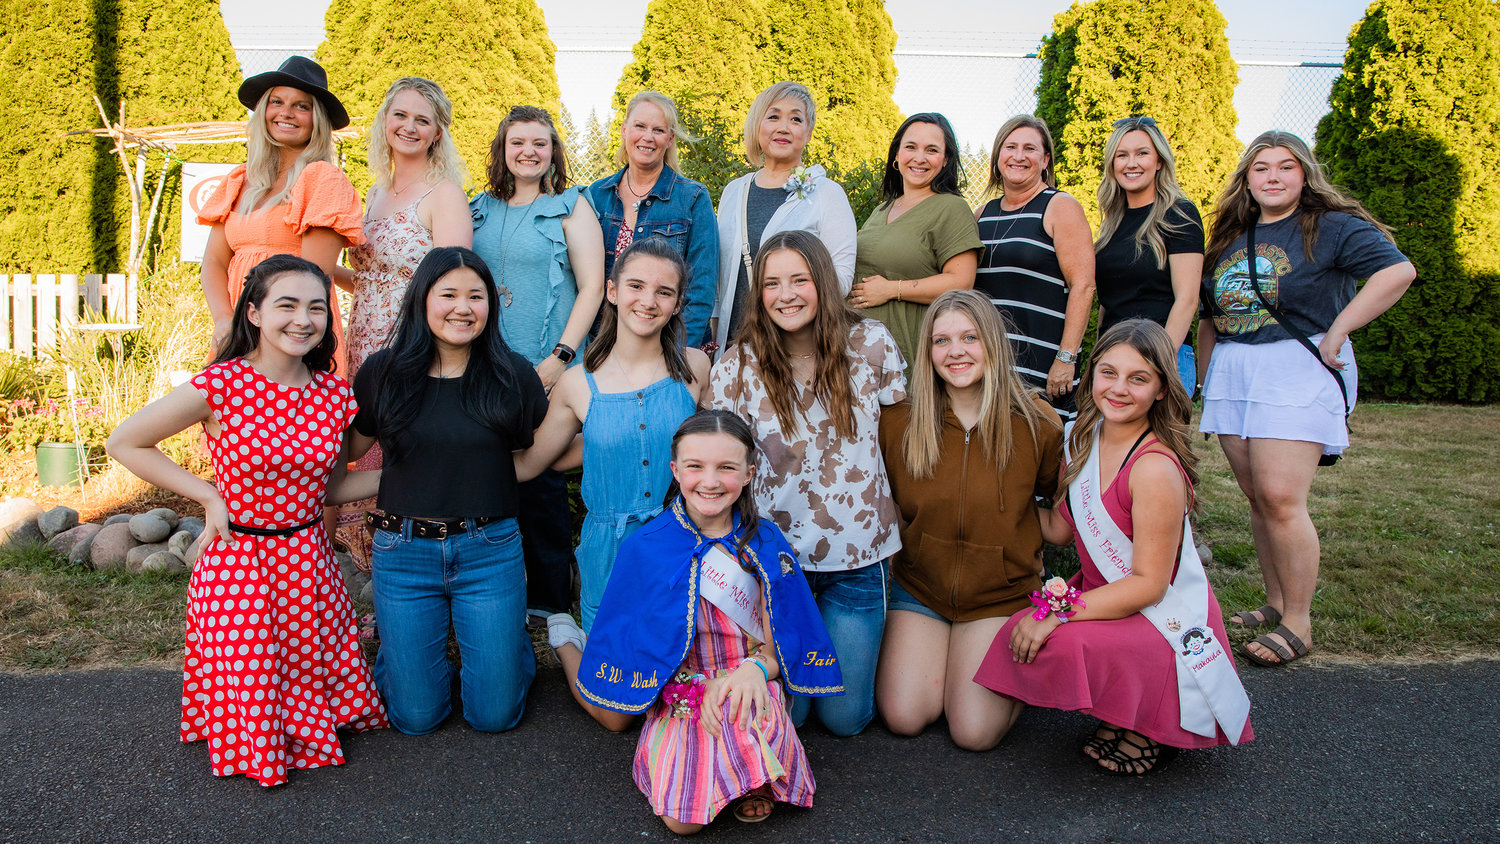 Emma Britton smiles for a photo with Little Miss Friendly alumni after donning the cape on the Saloon Stage at the Southwest Washington Fairgrounds on Tuesday. Back row left to right, Shasta Lofgren 2007, Bailey Peters Moon 2006, Camille Curfman 2005, Kathy Morrison 1973, Nani Jackins 1975, Rachel Gillispie 1993, Julie Briggs Moore 1979, Cassidy Best 2003, Aubrie Morey 2014. Second row left to right, Haiden Bartel 2019-20, Campbell Senter 2016, Natalie Butler 2018, Rachel Gray 2015, Reese Coleman 2017 and MaKayla Maynard 2021.